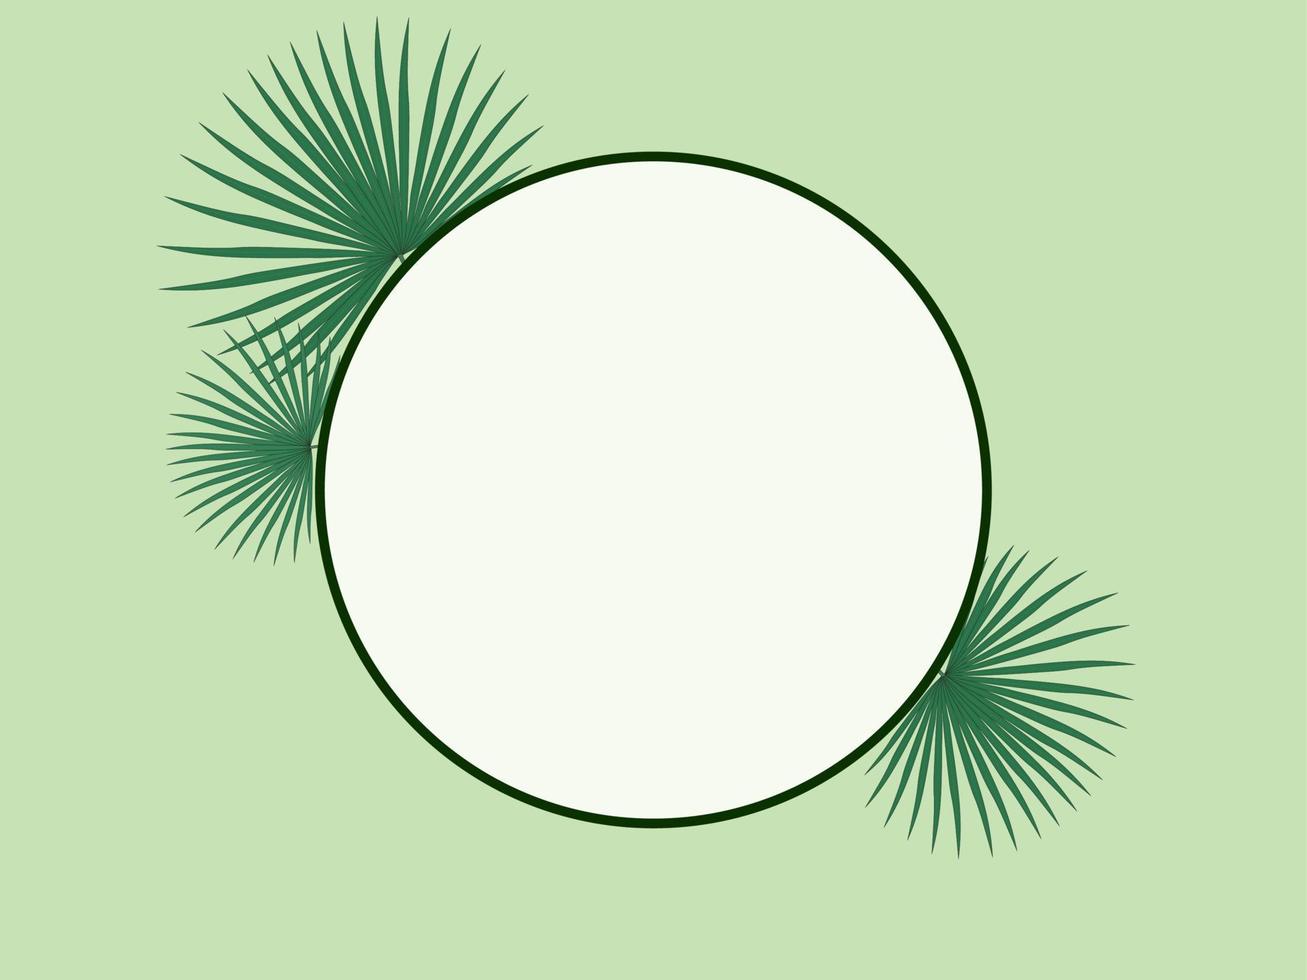 Light green background with circle frame and chamaerops palm leaves vector illustration